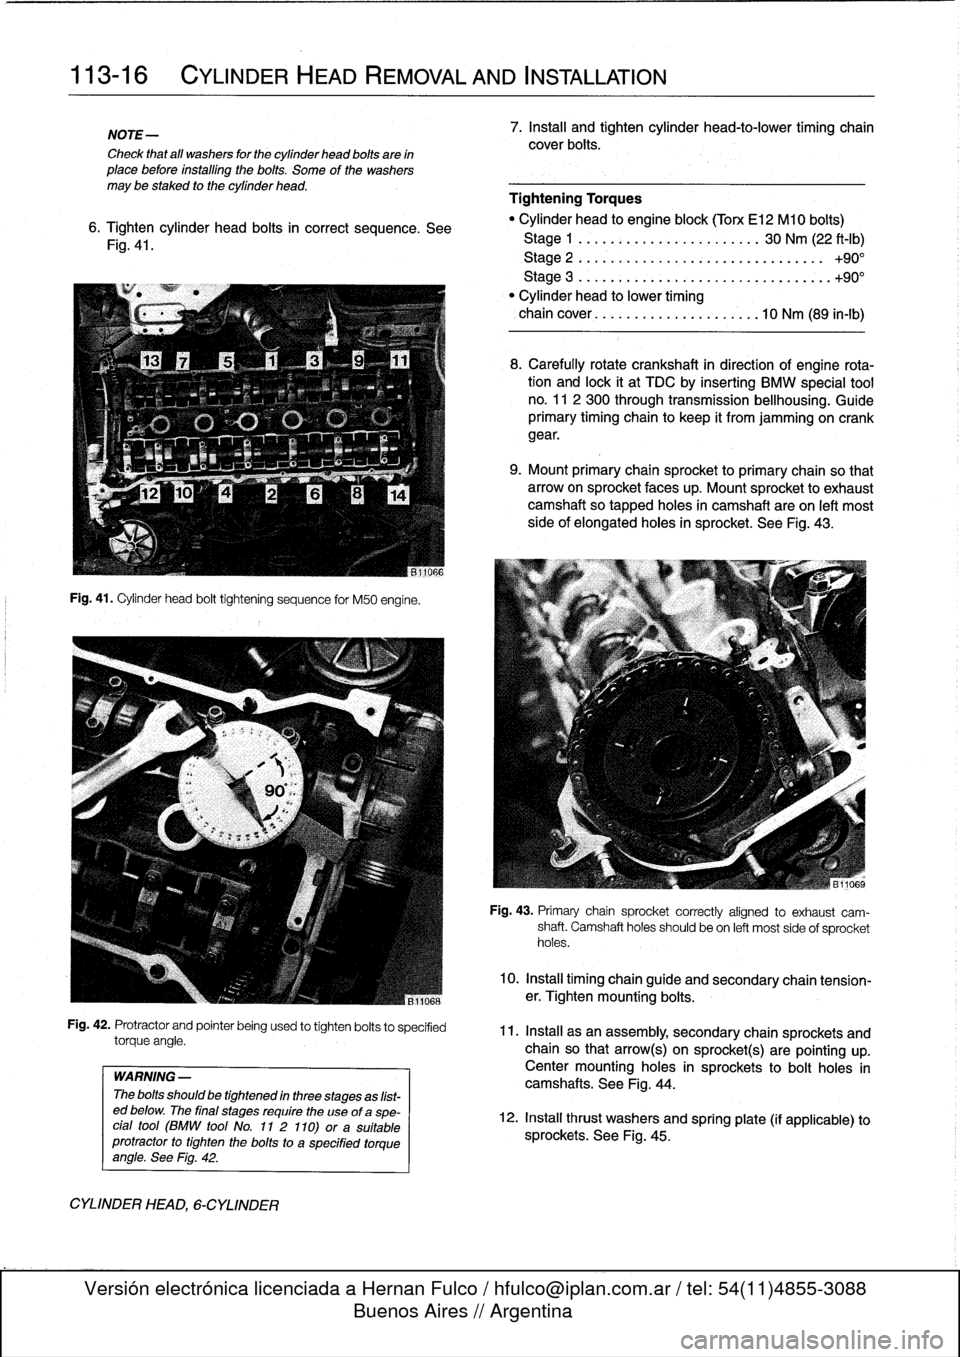 BMW 318i 1996 E36 Owners Guide 
113-16

	

CYLINDER
HEAD
REMOVAL
AND
INSTALLATION

NOTE-

Check
that
all
washers
for
the
cylinder
head
bolts
are
in
place
before
installlng
the
bolts
.
Some
of
the
washers
may
be
staked
to
the
cylind